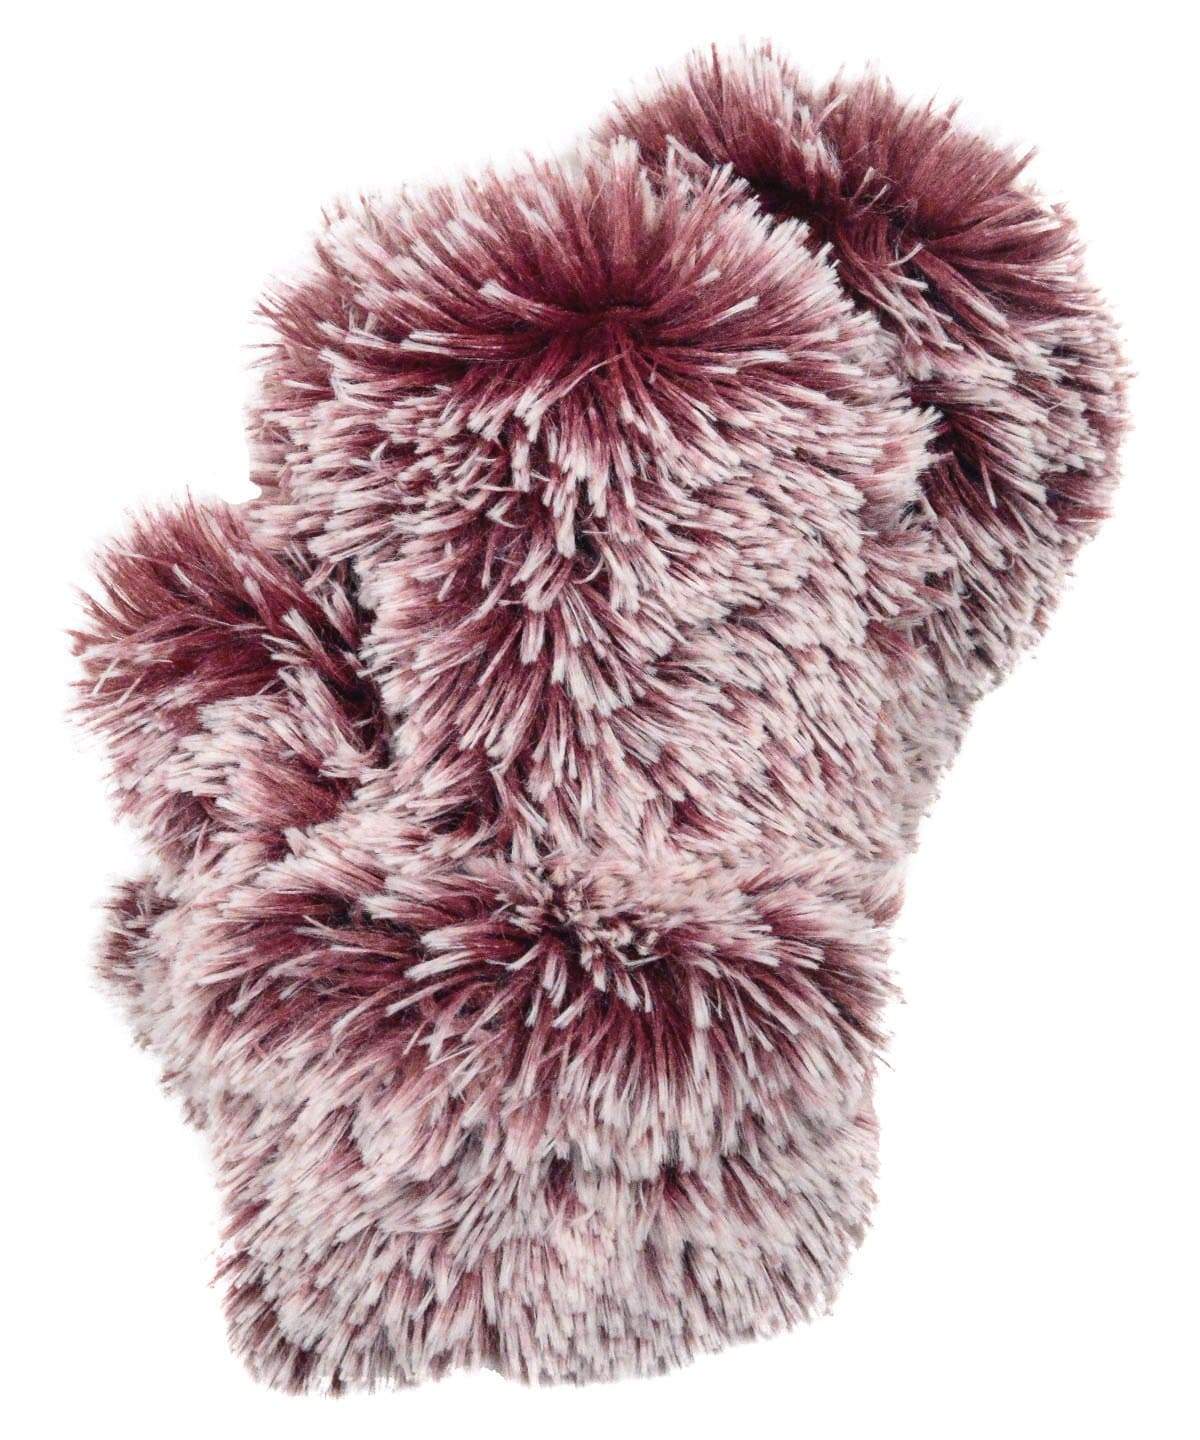 Women’s Product shot of Mittens. Gauntlets, Mitts | Berry Foxy, burgundy with white tips long hair Faux Fur | Handmade by Pandemonium Millinery Seattle, WA USA